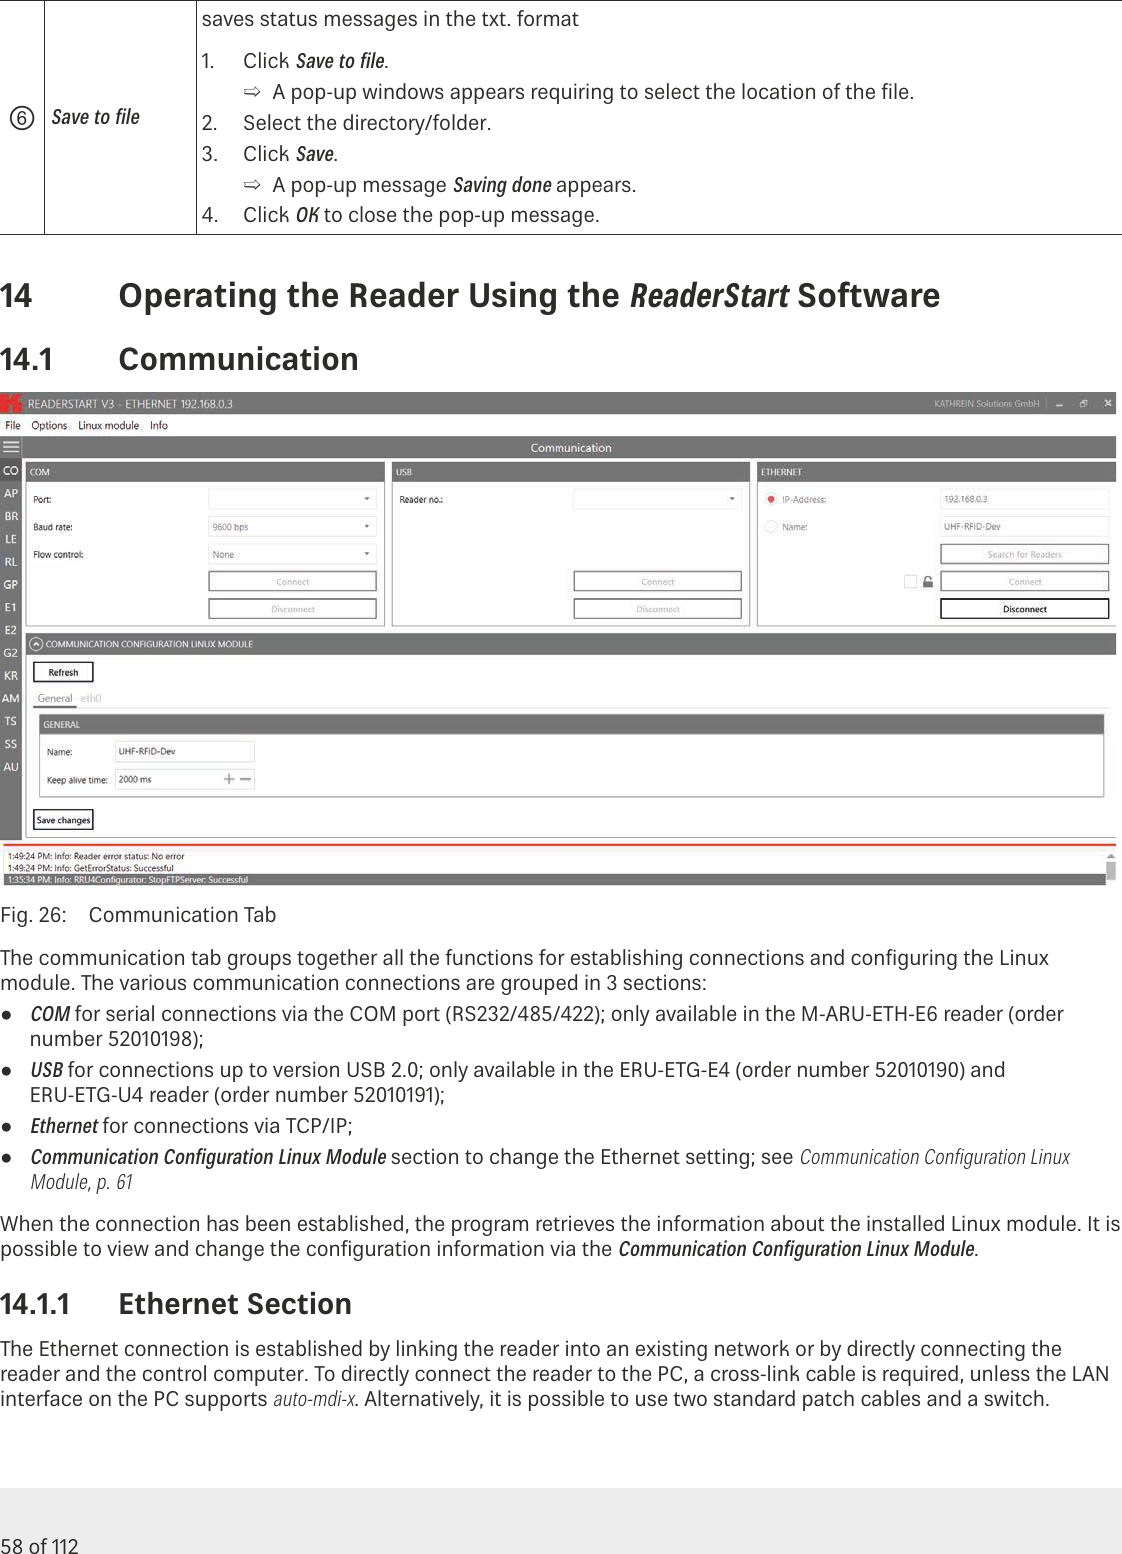 58 of 112Operating the Reader Using the ReaderStart Software⑥Save to ﬁlesaves status messages in the txt. format1.  Click Save to ﬁle. ➯A pop-up windows appears requiring to select the location of the ﬁle.2.  Select the directory/folder.3.  Click Save. ➯A pop-up message Saving done appears.4.  Click OK to close the pop-up message.14  Operating the Reader Using the ReaderStart Software14.1  CommunicationFig. 26:  Communication TabThe communication tab groups together all the functions for establishing connections and conﬁguring the Linux module. The various communication connections are grouped in 3 sections: ●COM for serial connections via the COM port (RS232/485/422); only available in the M-ARU-ETH-E6 reader (order number 52010198); ●USB for connections up to version USB 2.0; only available in the ERU-ETG-E4 (order number 52010190) and ERU-ETG-U4 reader (order number 52010191); ●Ethernet for connections via TCP/IP; ●Communication Conﬁguration Linux Module section to change the Ethernet setting; see Communication Conﬁguration Linux Module, p.61When the connection has been established, the program retrieves the information about the installed Linux module. It is possible to view and change the conﬁguration information via the Communication Conﬁguration Linux Module.14.1.1  Ethernet SectionThe Ethernet connection is established by linking the reader into an existing network or by directly connecting the reader and the control computer. To directly connect the reader to the PC, a cross-link cable is required, unless the LAN interface on the PC supports auto-mdi-x. Alternatively, it is possible to use two standard patch cables and a switch.